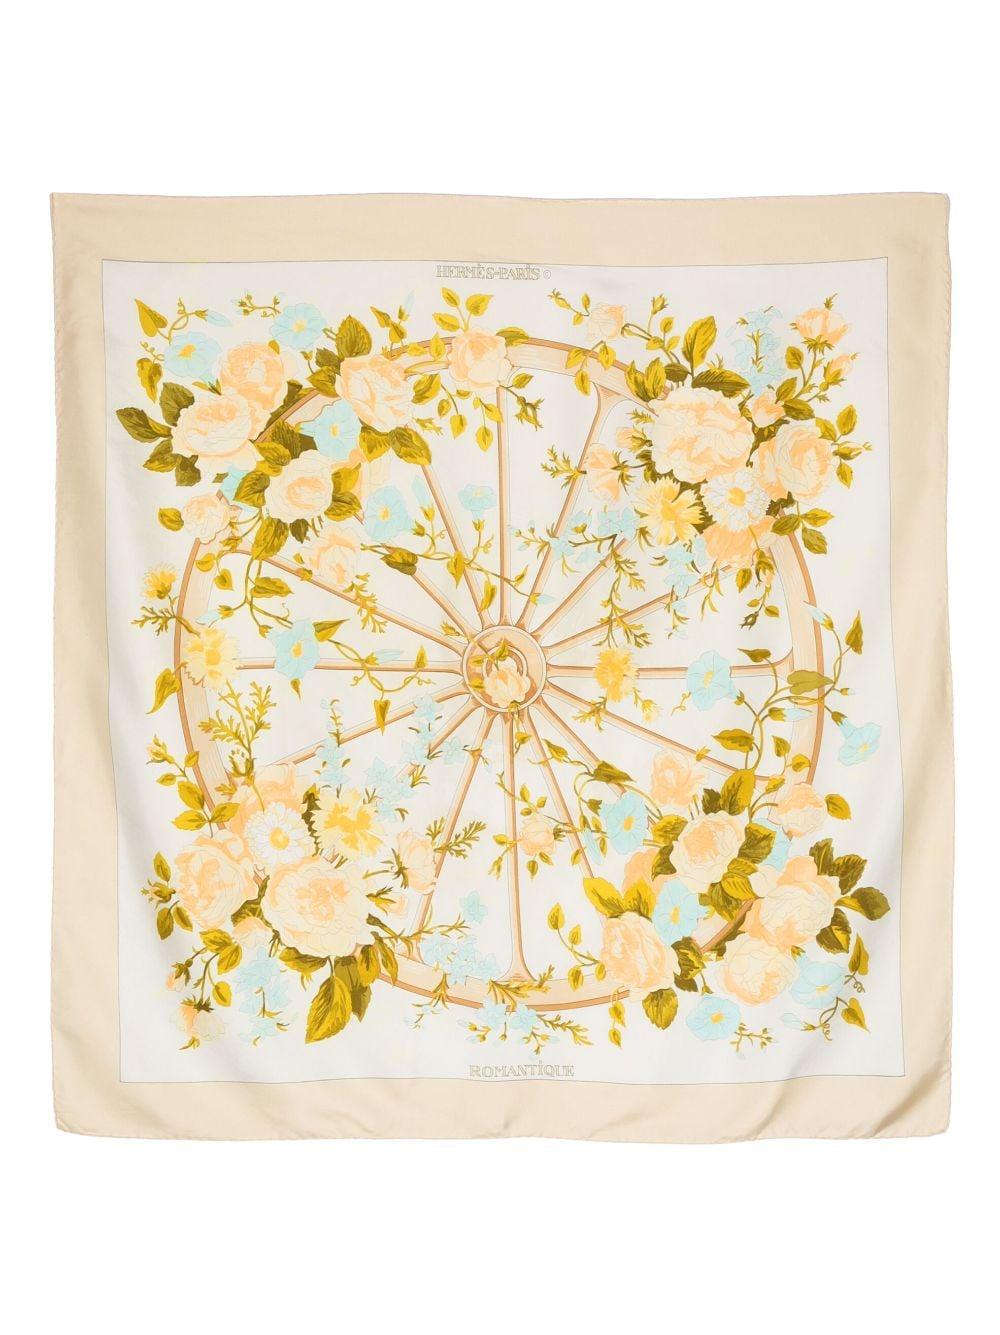 Hermes Romantique by Maurice Tranchant Silk Scarf 4